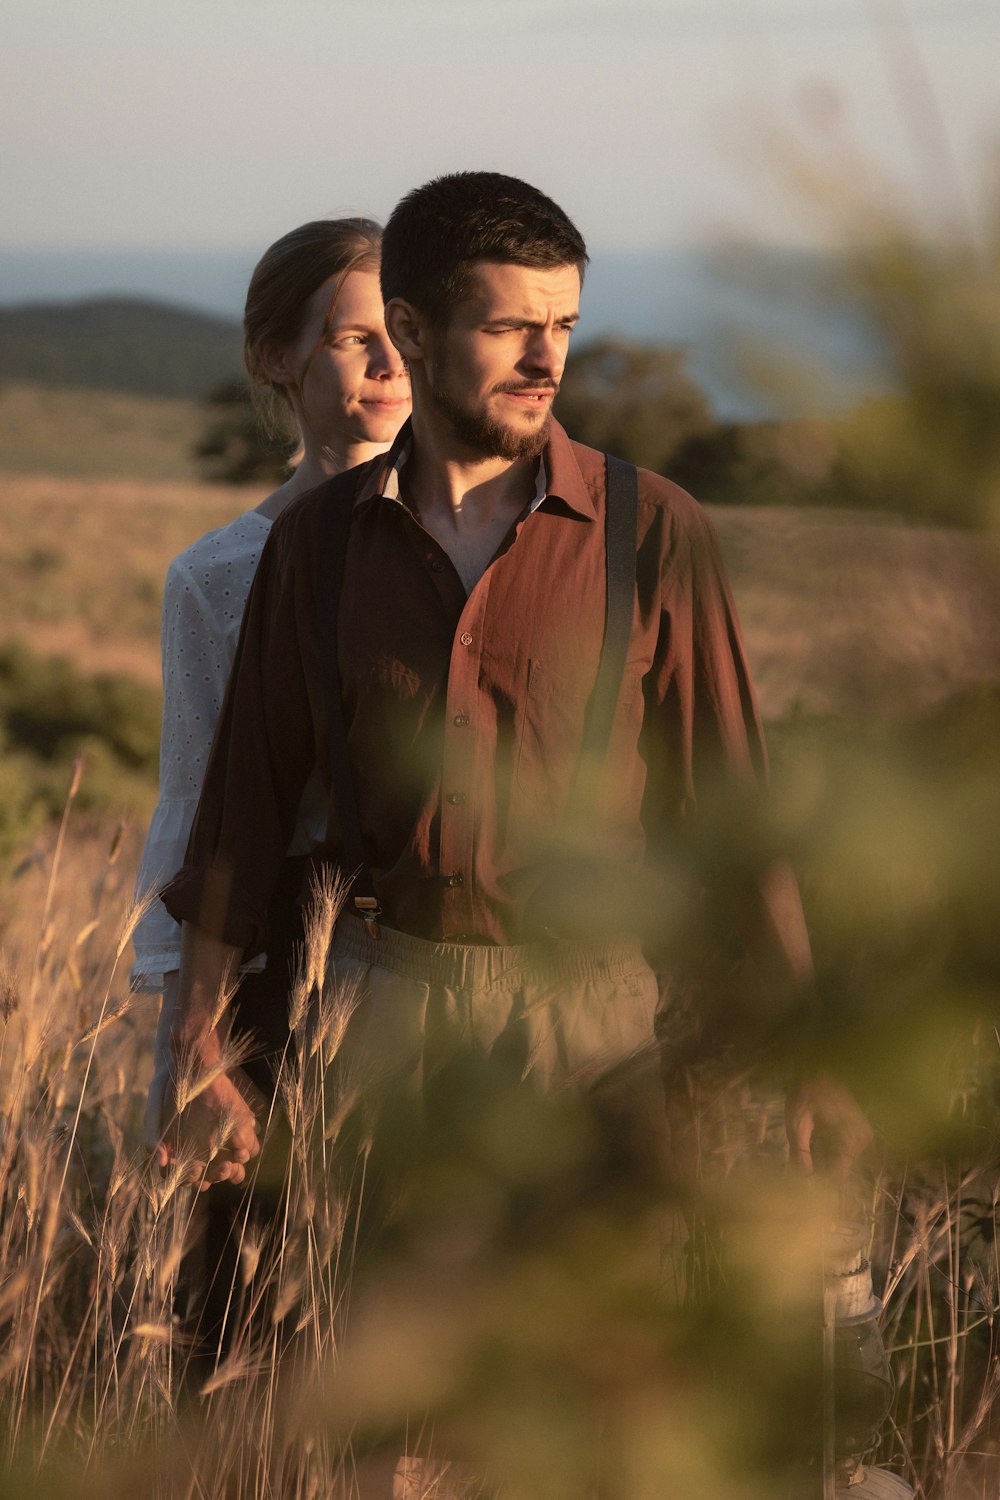 a man and woman standing in a field of tall grass